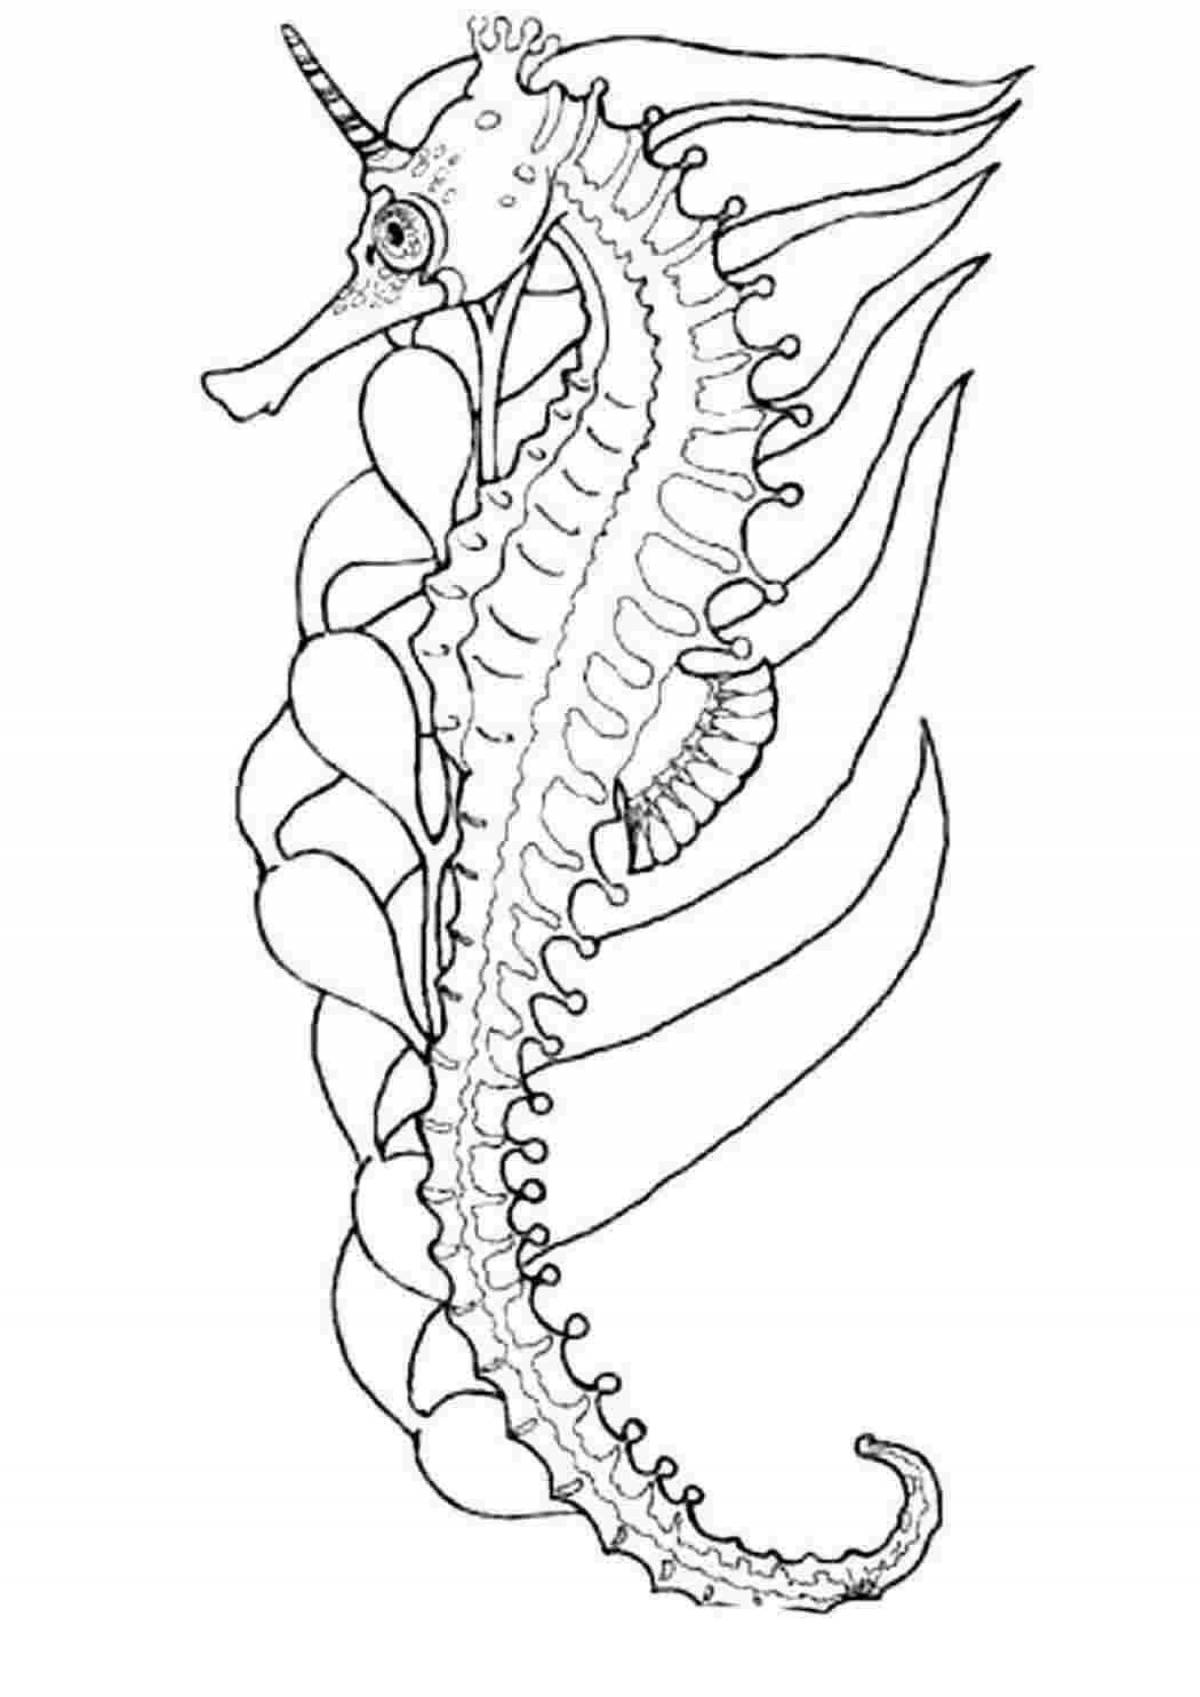 Awesome seahorse coloring pages for kids